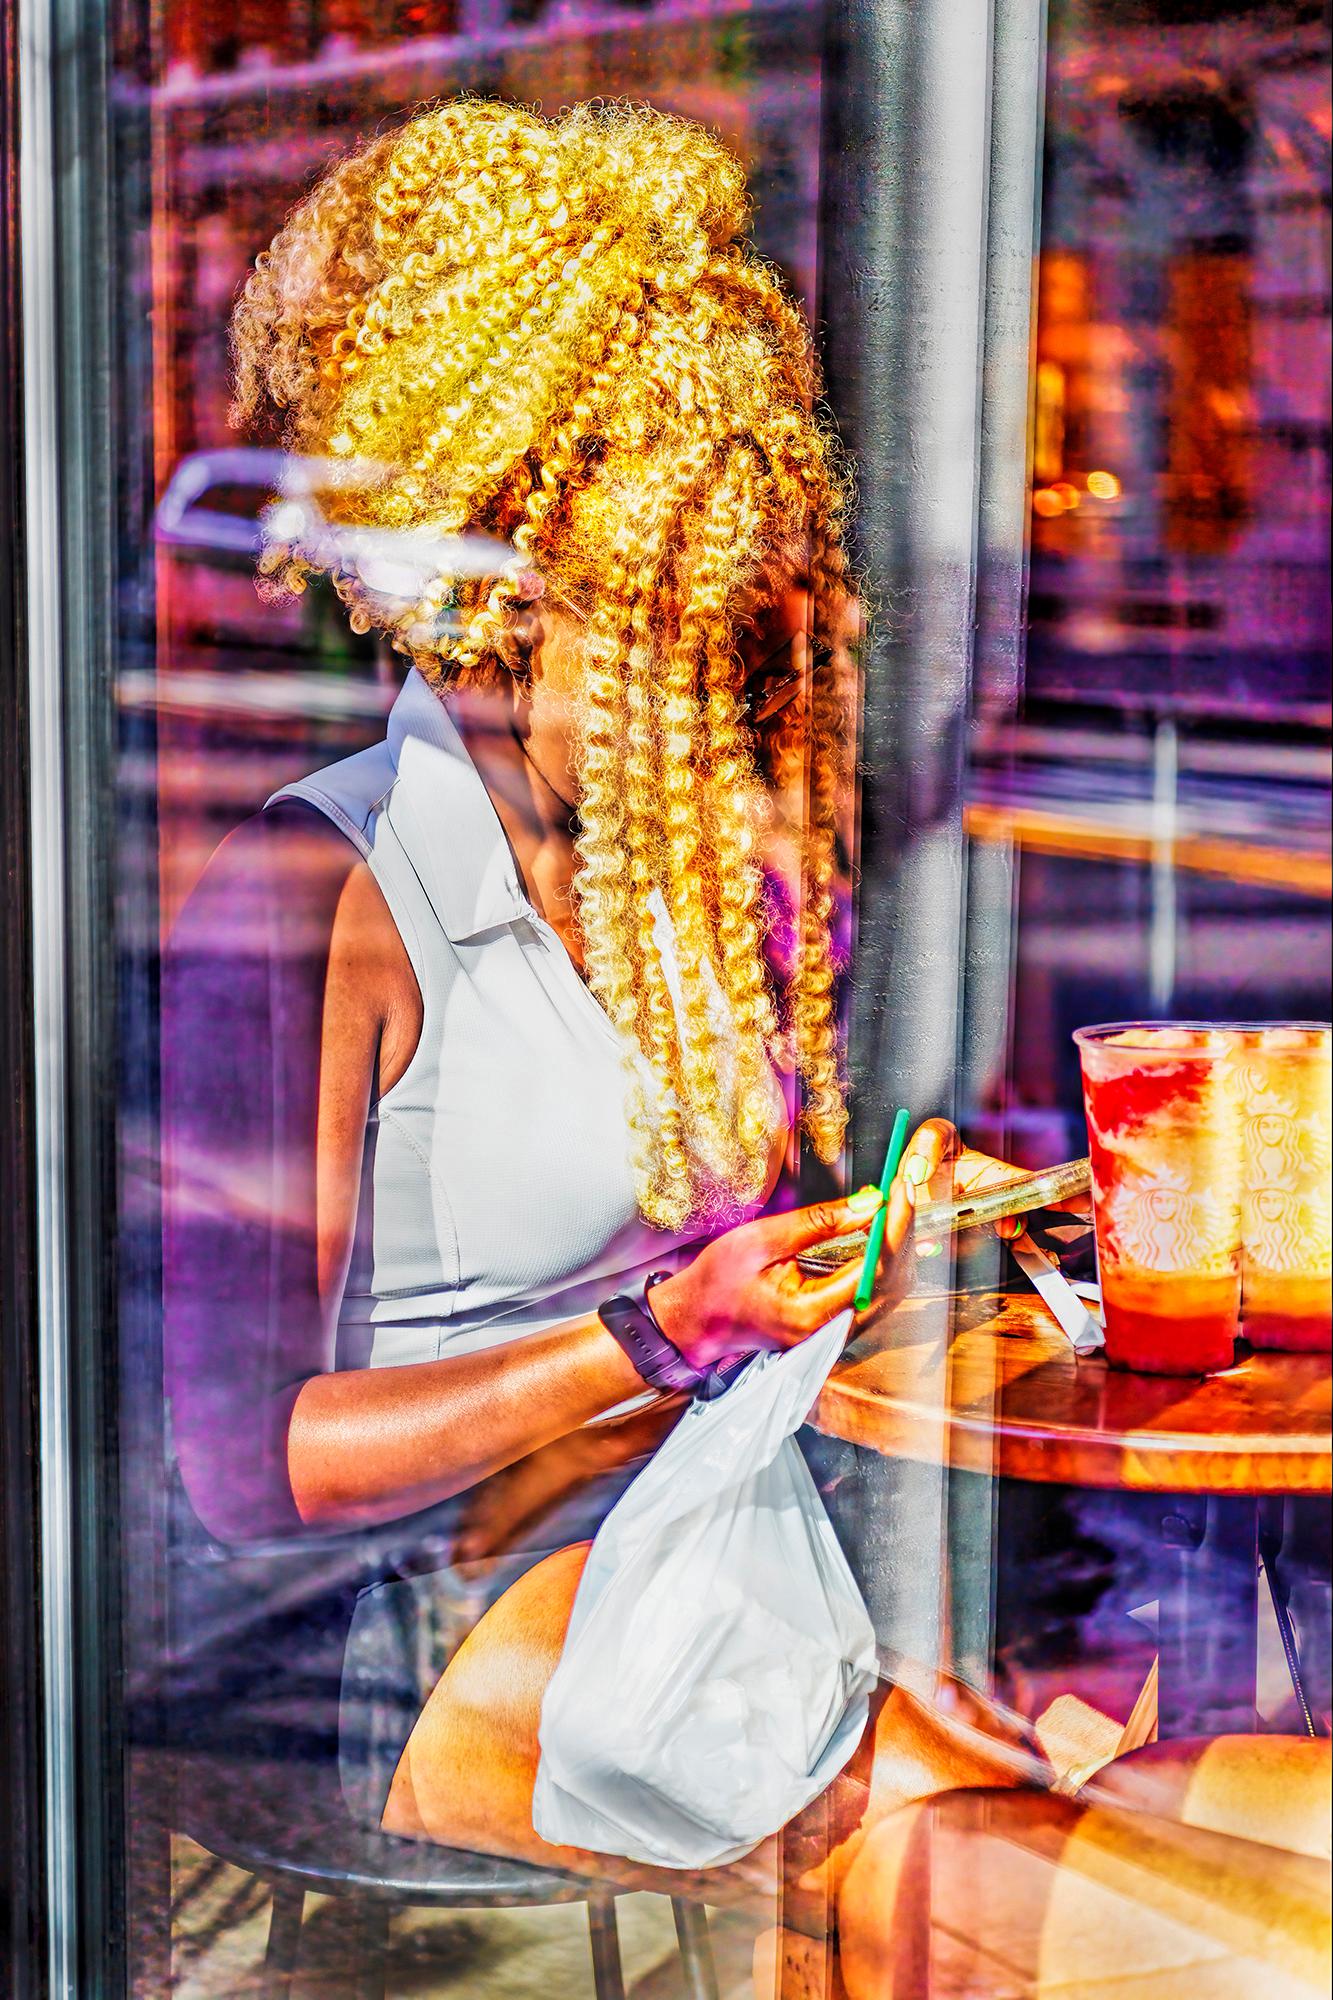 Portrait Photograph Mitchell Funk - Woman Black with Flamboyant Hair at Cafe